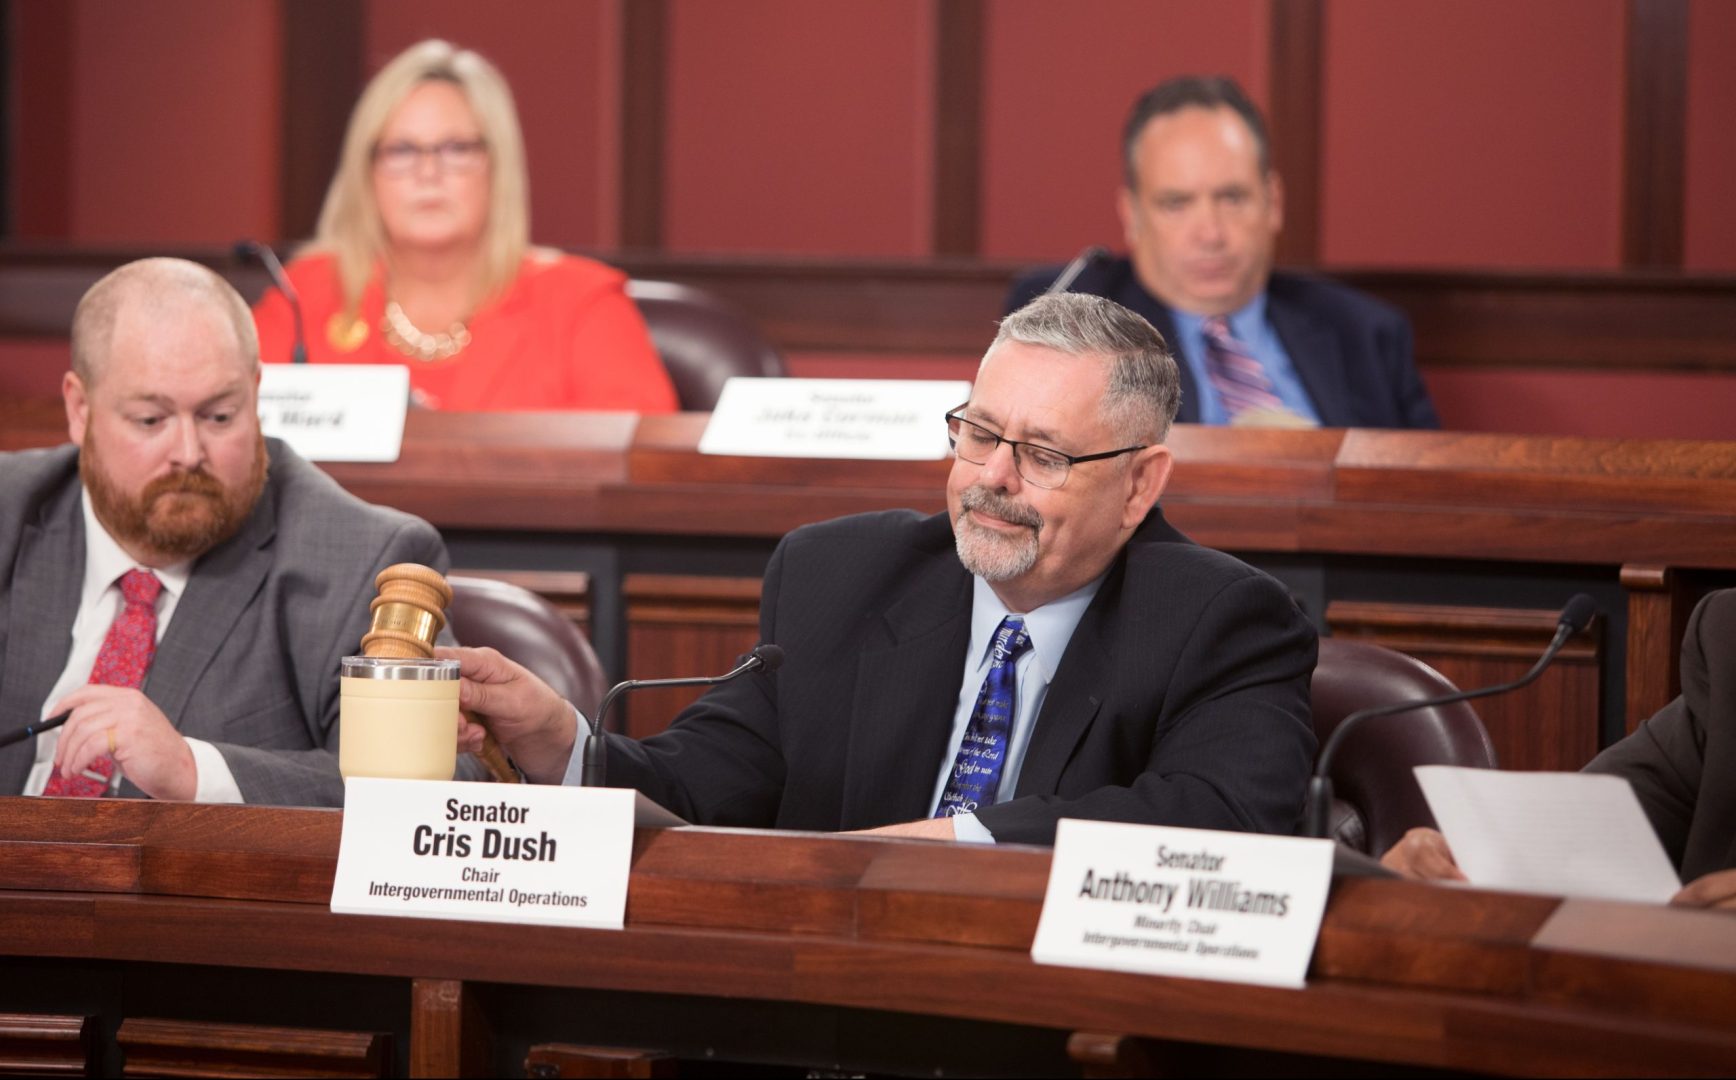 Sen. Cris Dush (R., Jefferson), who took over and renewed the election investigation in August 2021 after it was inactive for months, said any legislative fixes to the voter registration system will come after the inquiry ends.